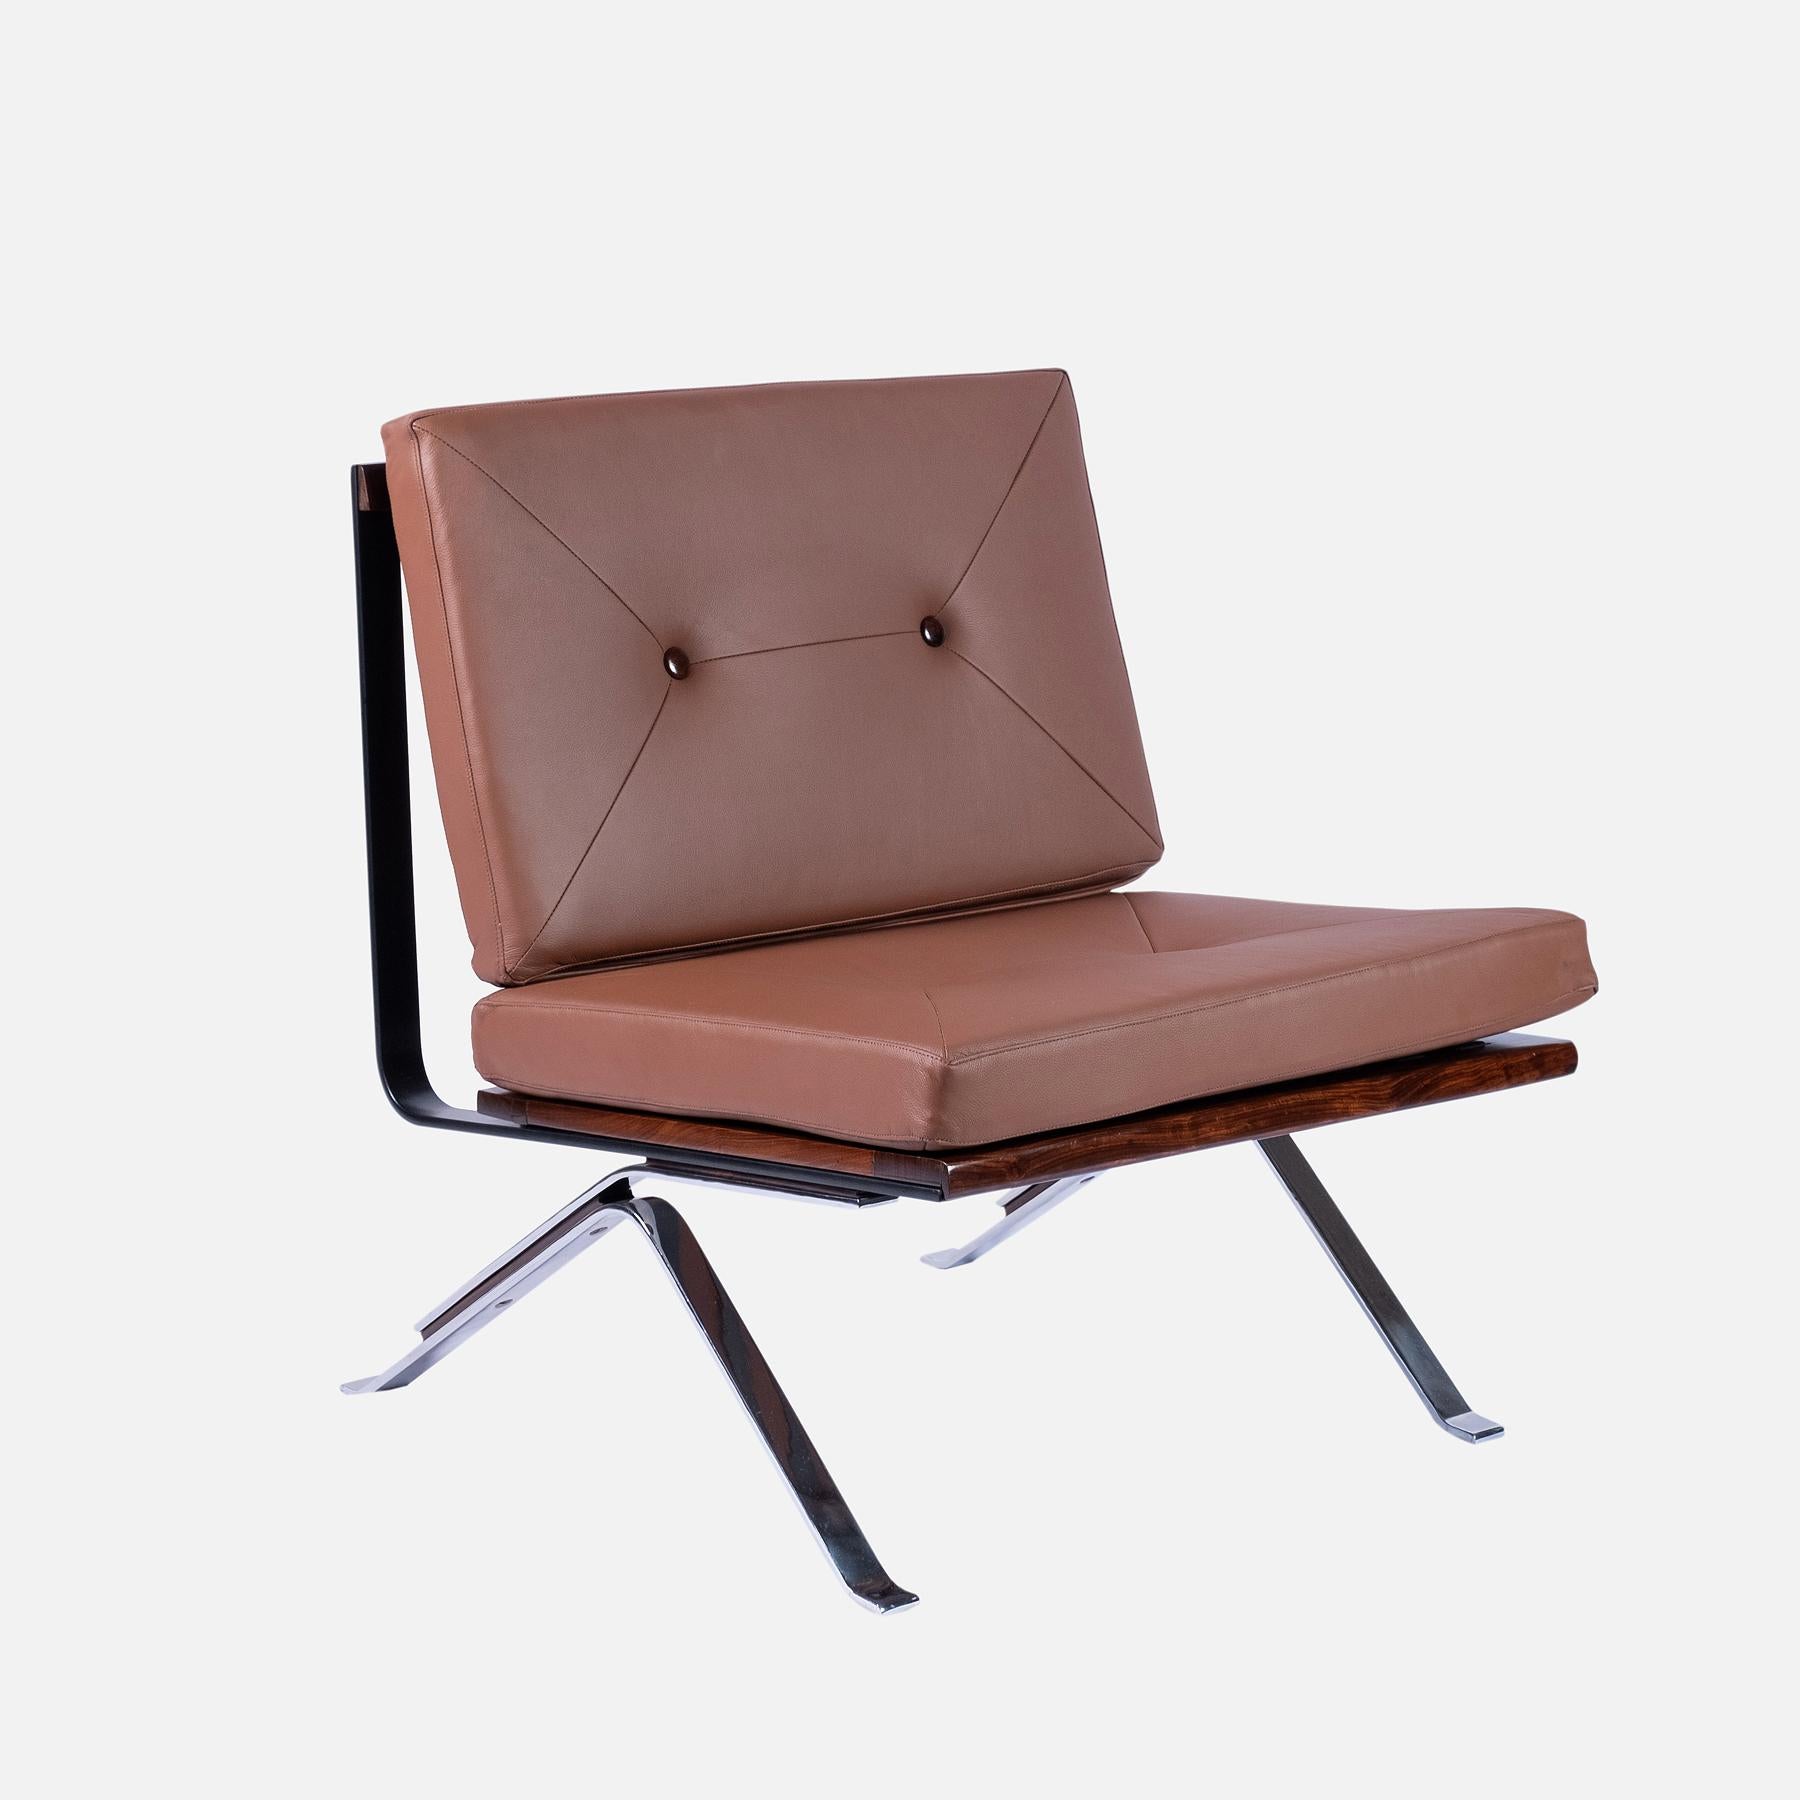 This magnificent pair of lounge chairs consists of a metal and rosewood frame with camel leather straps and cushions.
These pieces have exceptional details, such as the noble rosewood buttons.
They were manufactured by Móveis Novo Rumo, a Brazilian